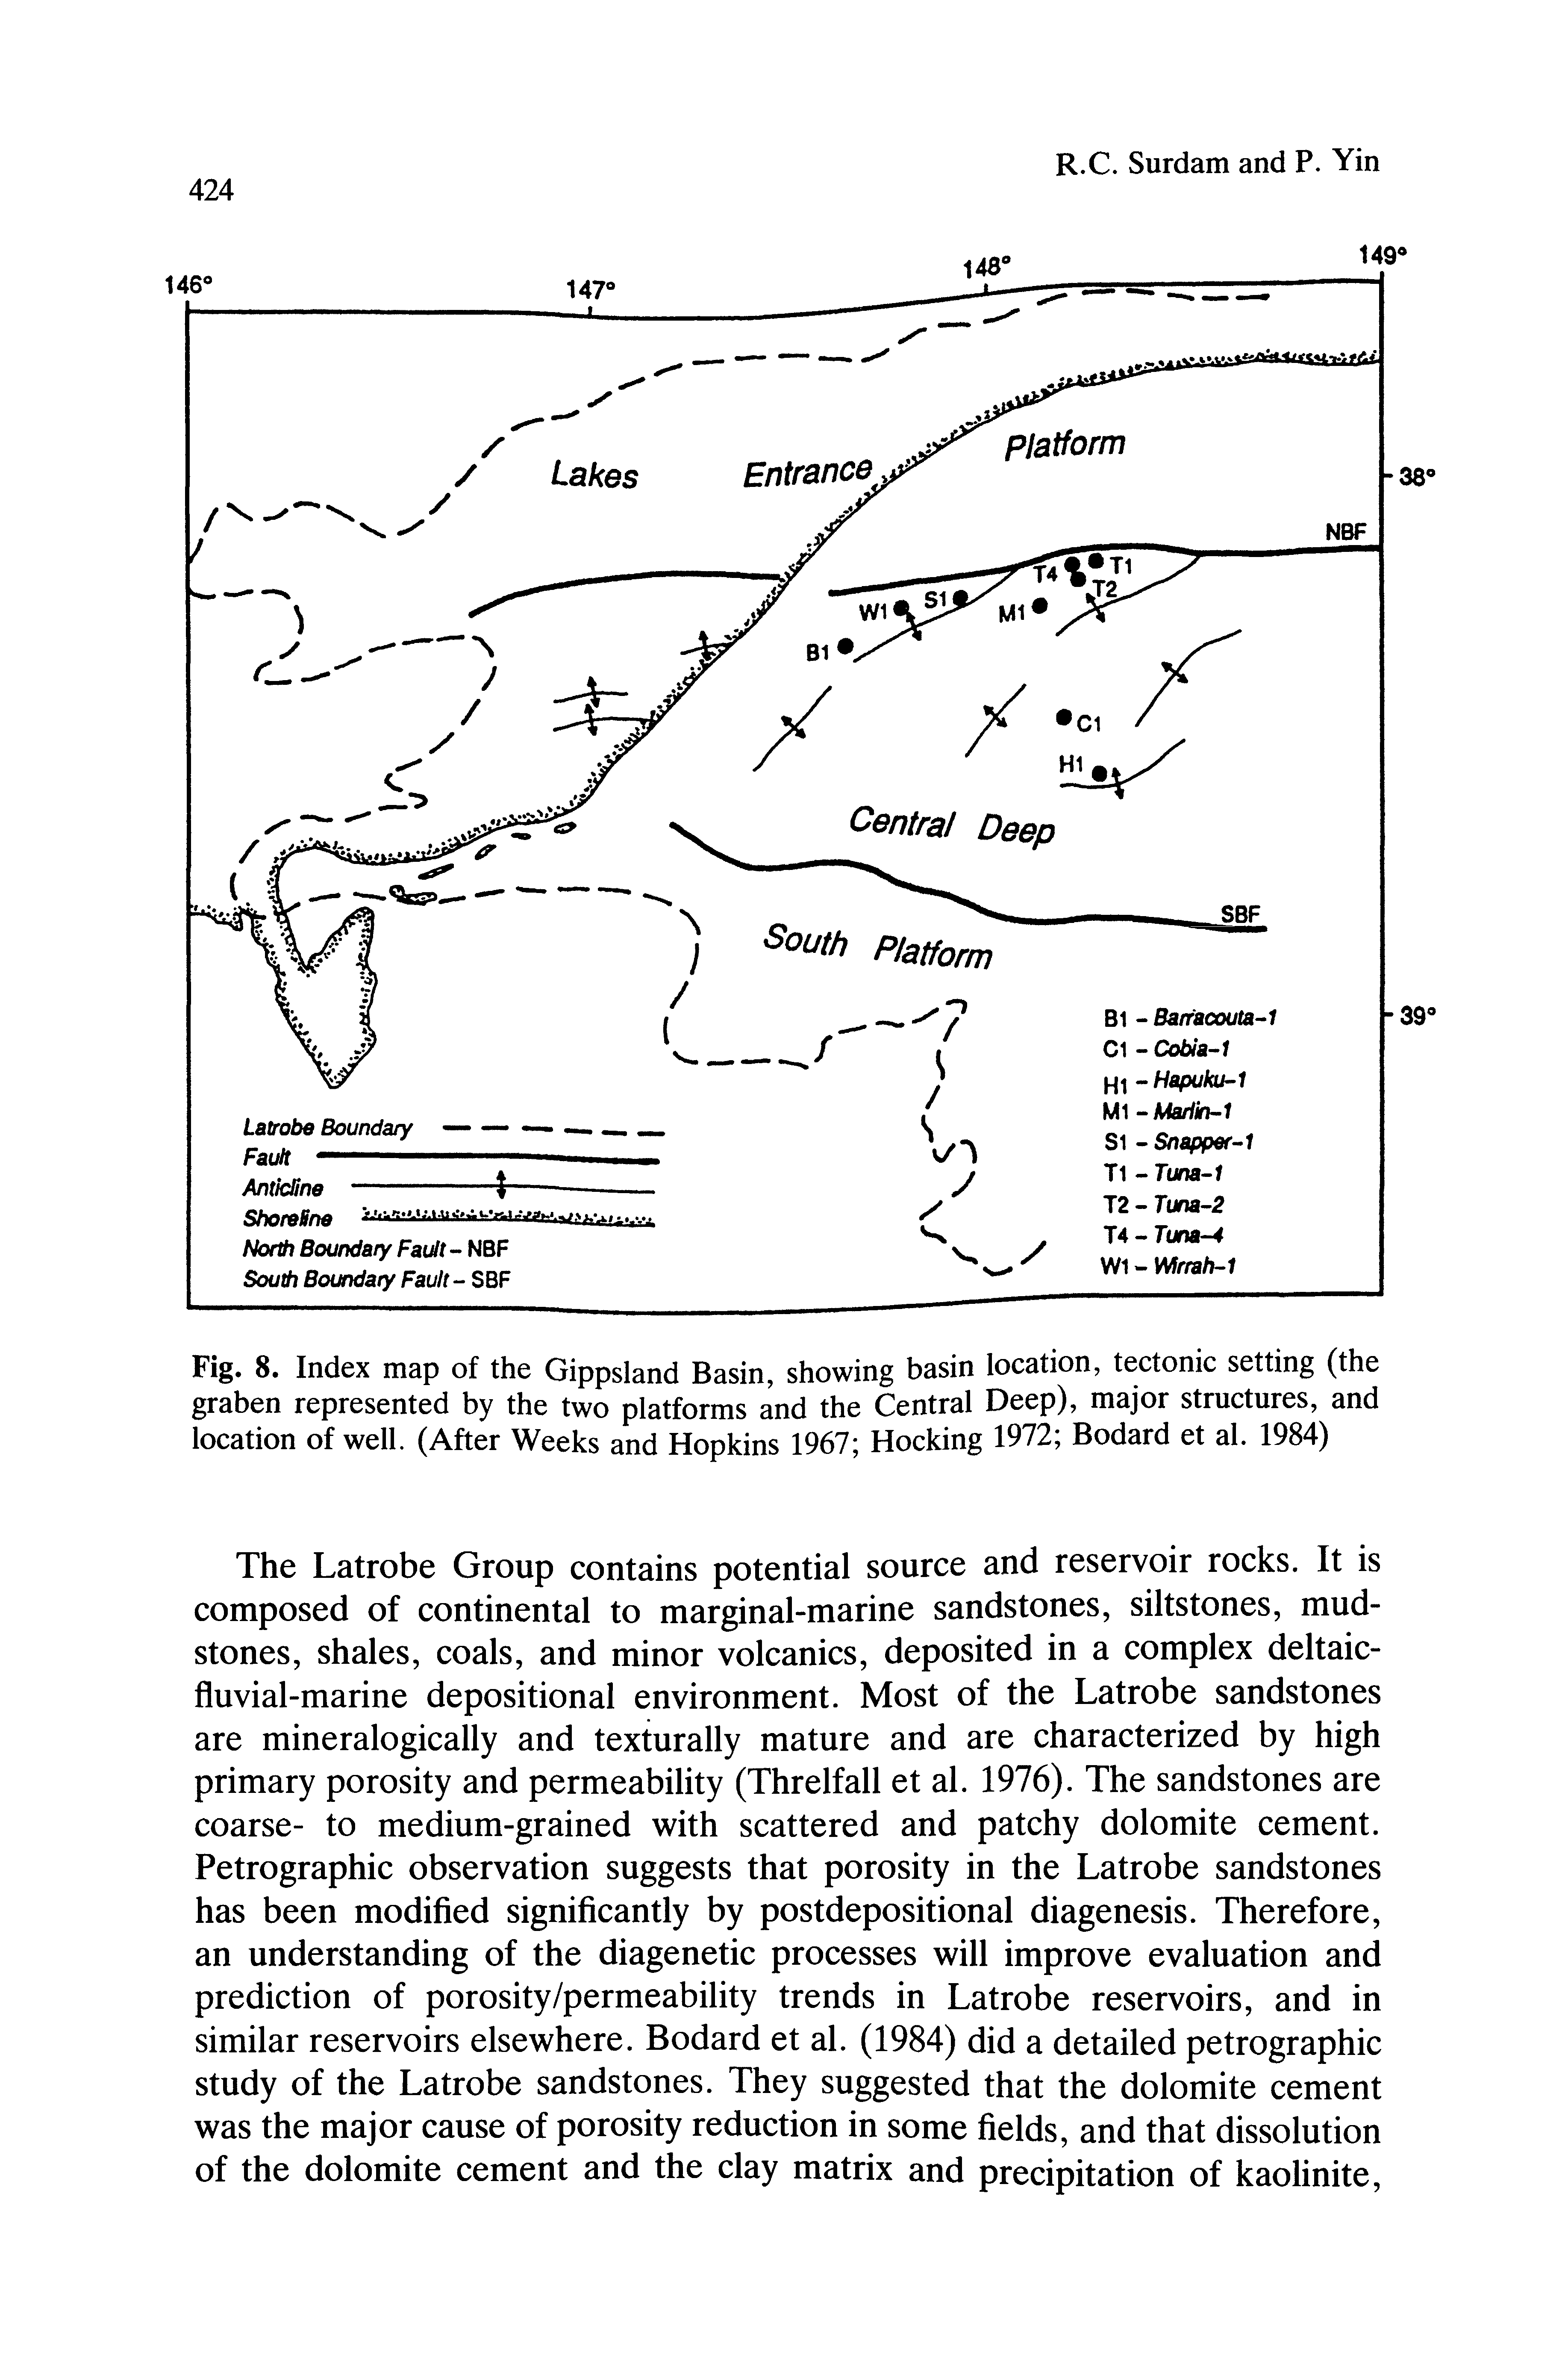 Fig. 8. Index map of the Gippsland Basin, showing basin location, tectonic setting (the graben represented by the two platforms and the Central Deep), major structures, and location of well. (After Weeks and Hopkins 1967 Hocking 1972 Bodard et al. 1984)...